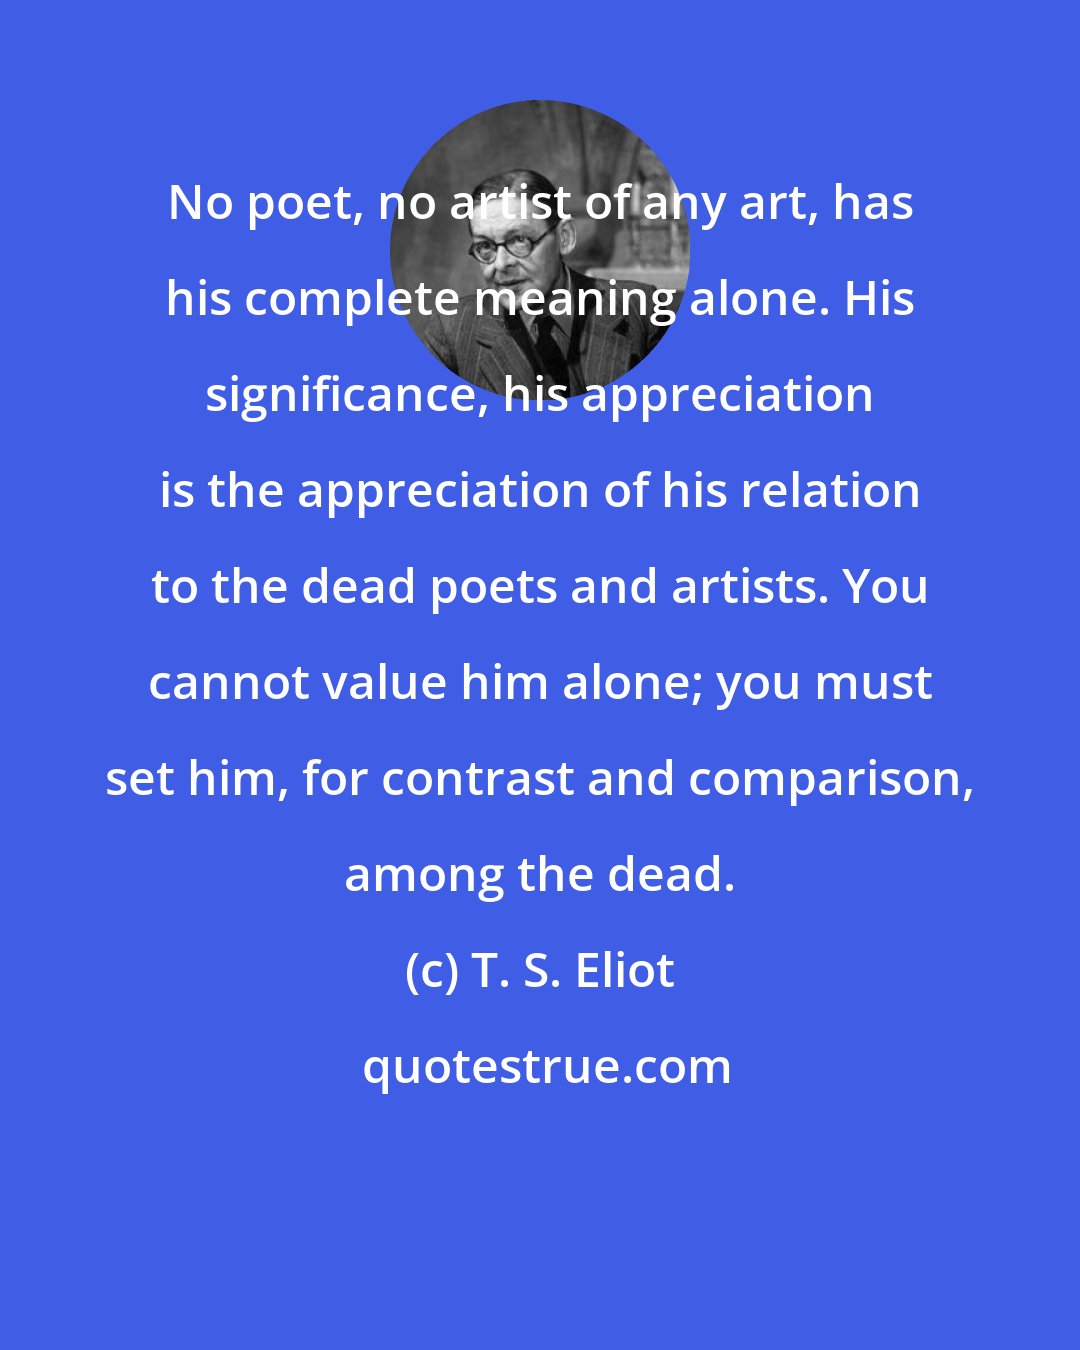 T. S. Eliot: No poet, no artist of any art, has his complete meaning alone. His significance, his appreciation is the appreciation of his relation to the dead poets and artists. You cannot value him alone; you must set him, for contrast and comparison, among the dead.